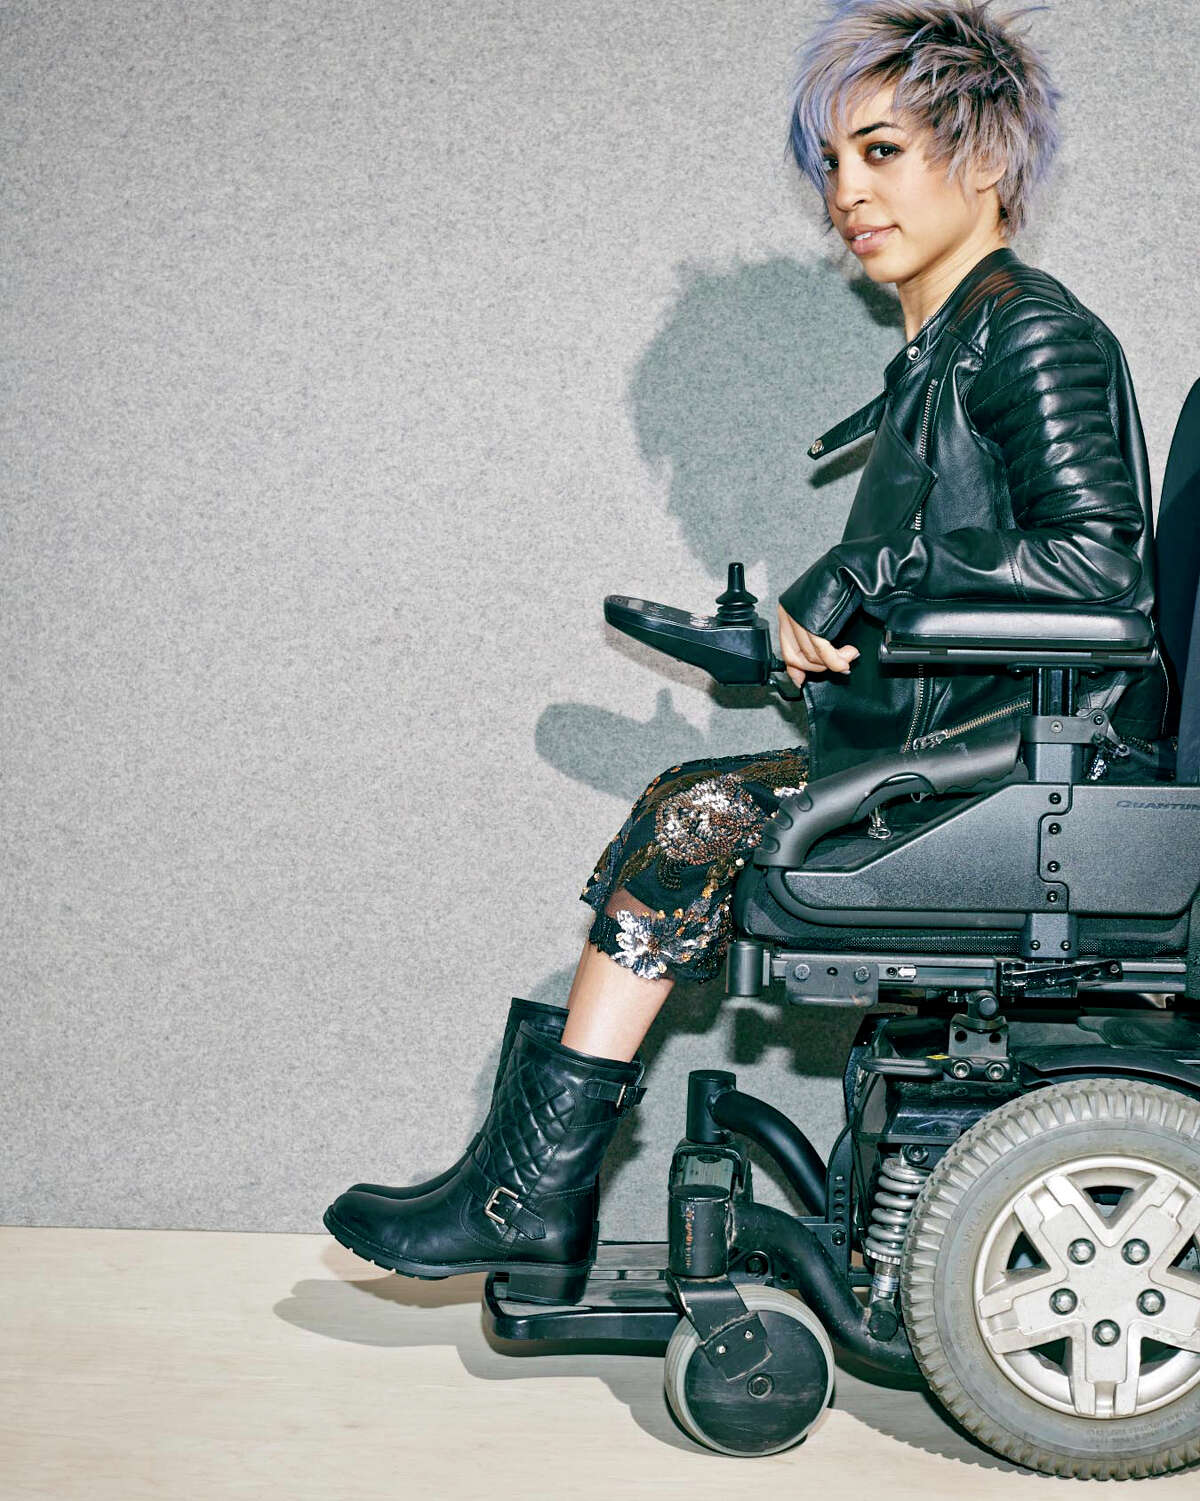 Nordstrom has been using professional models with disabilities since 1997.